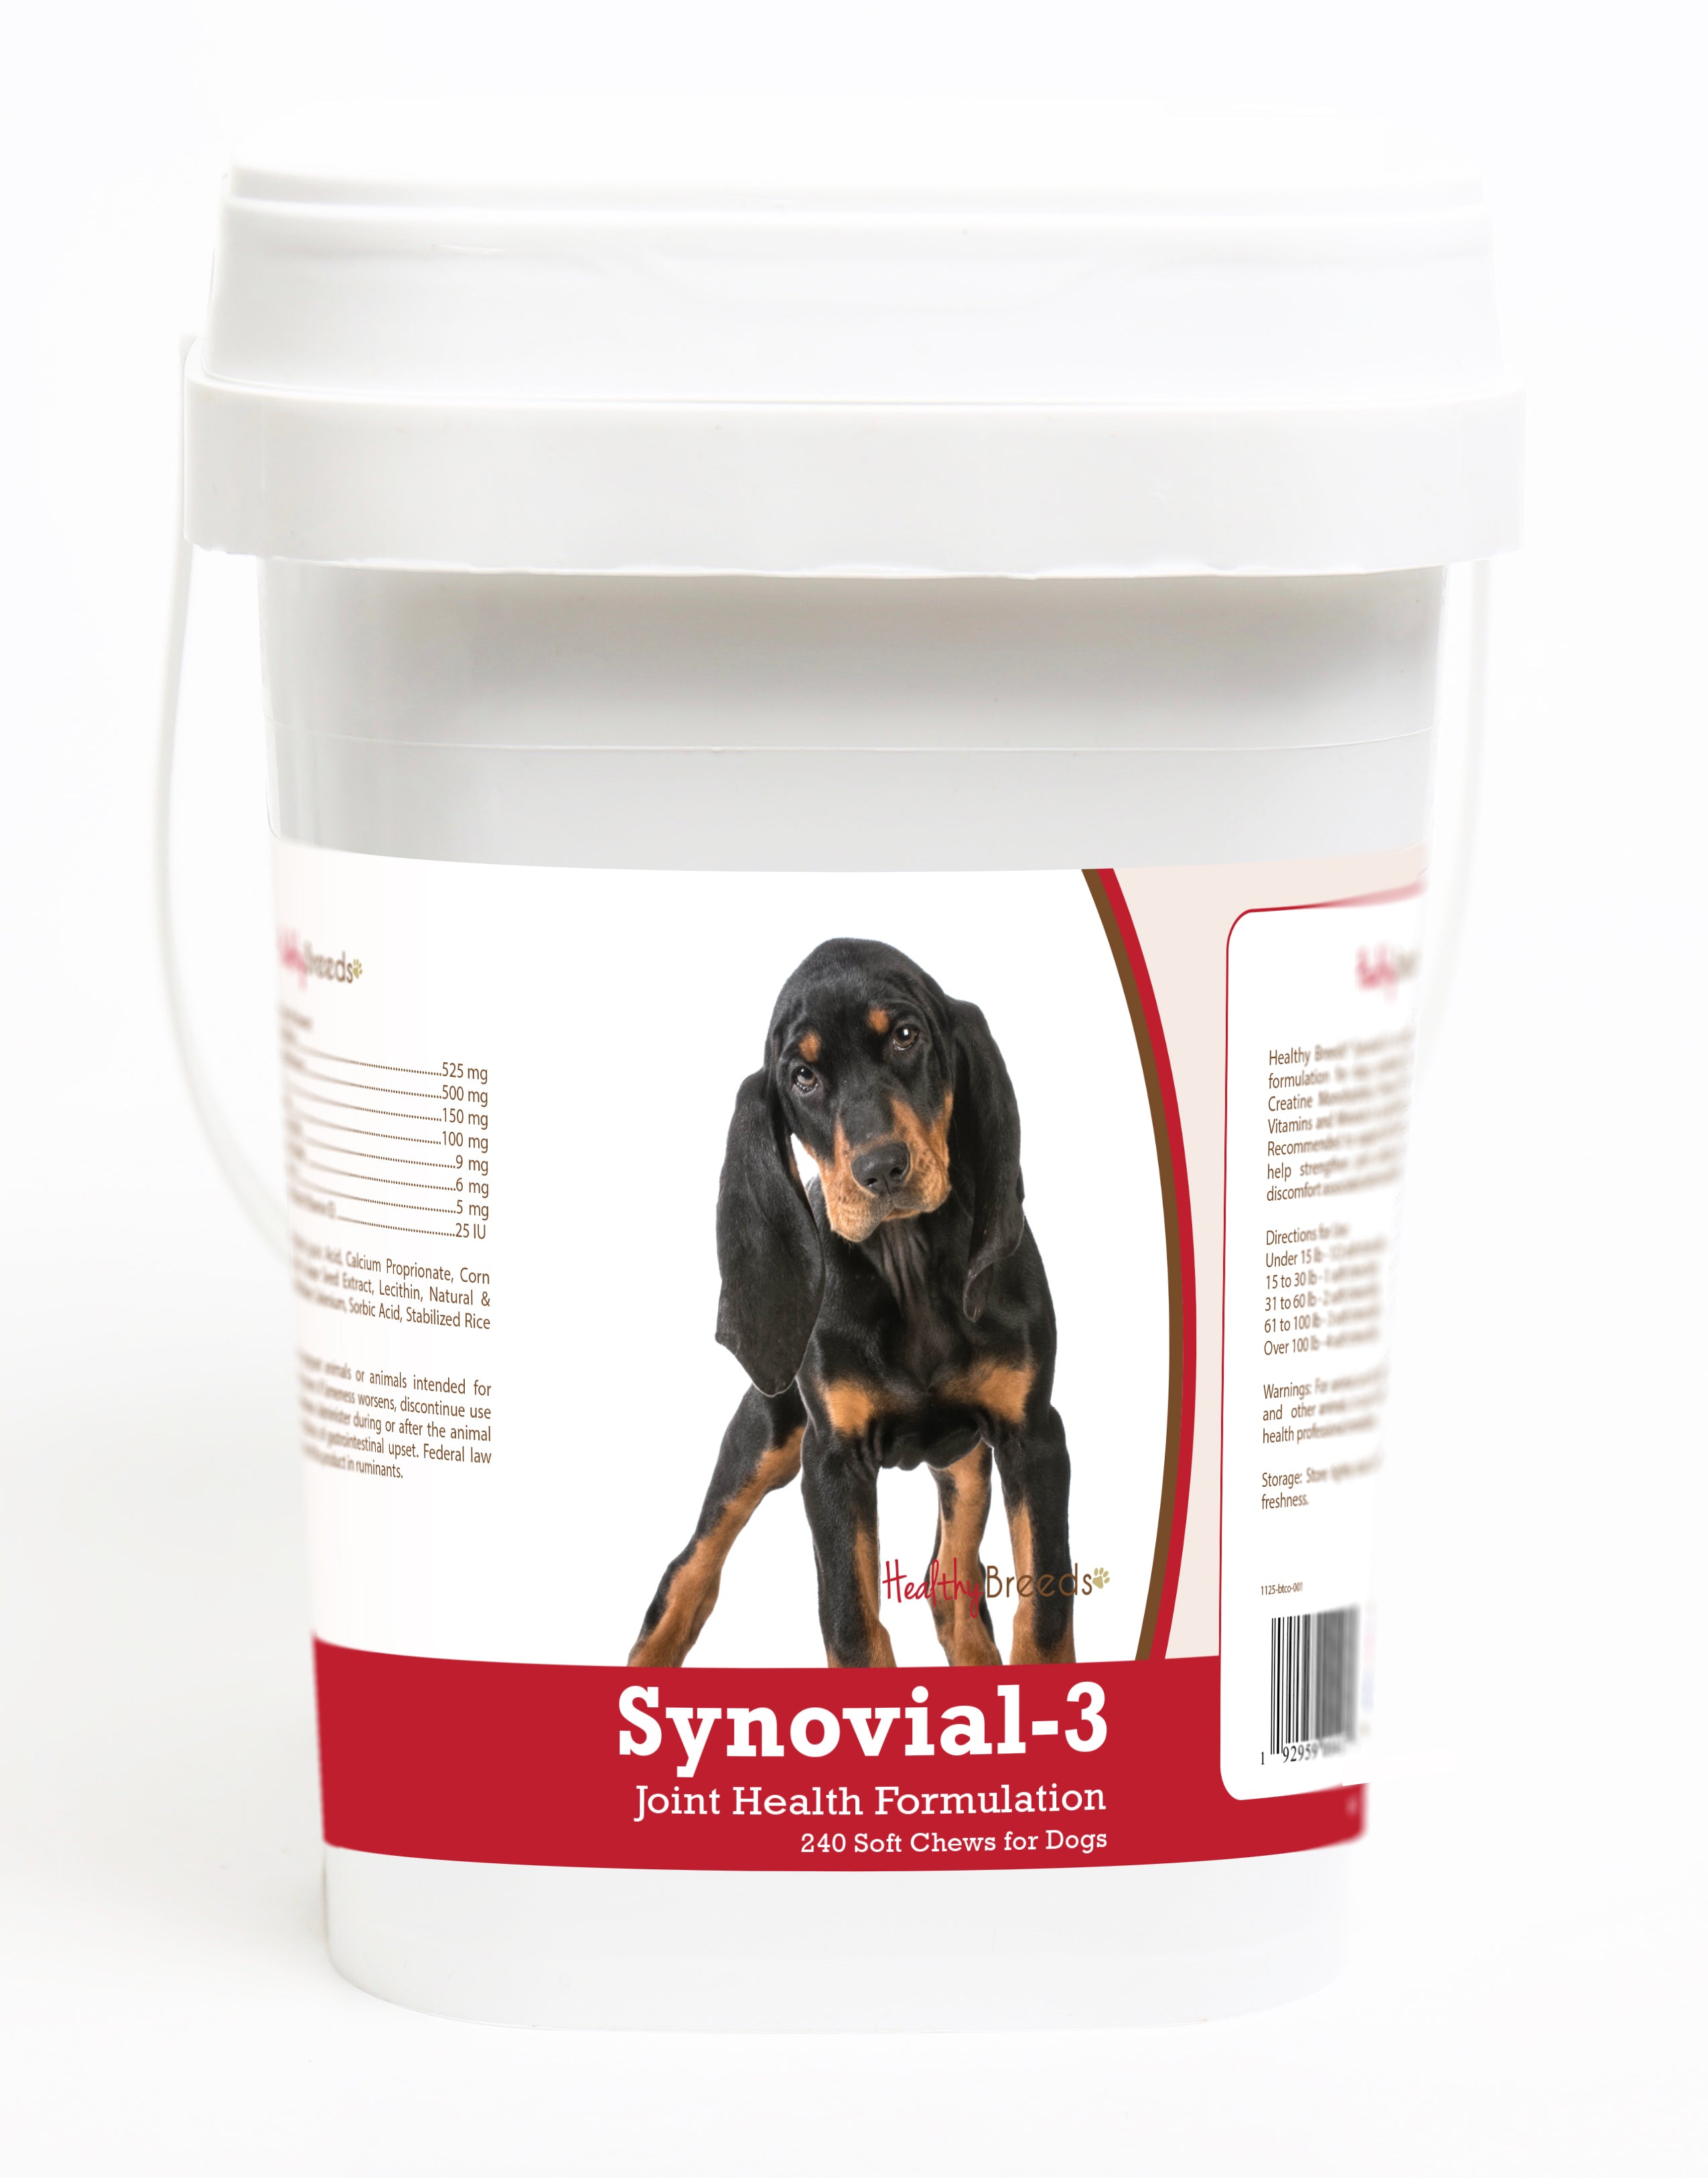 Black and Tan Coonhound Synovial-3 Joint Health Formulation Soft Chews 240 Count